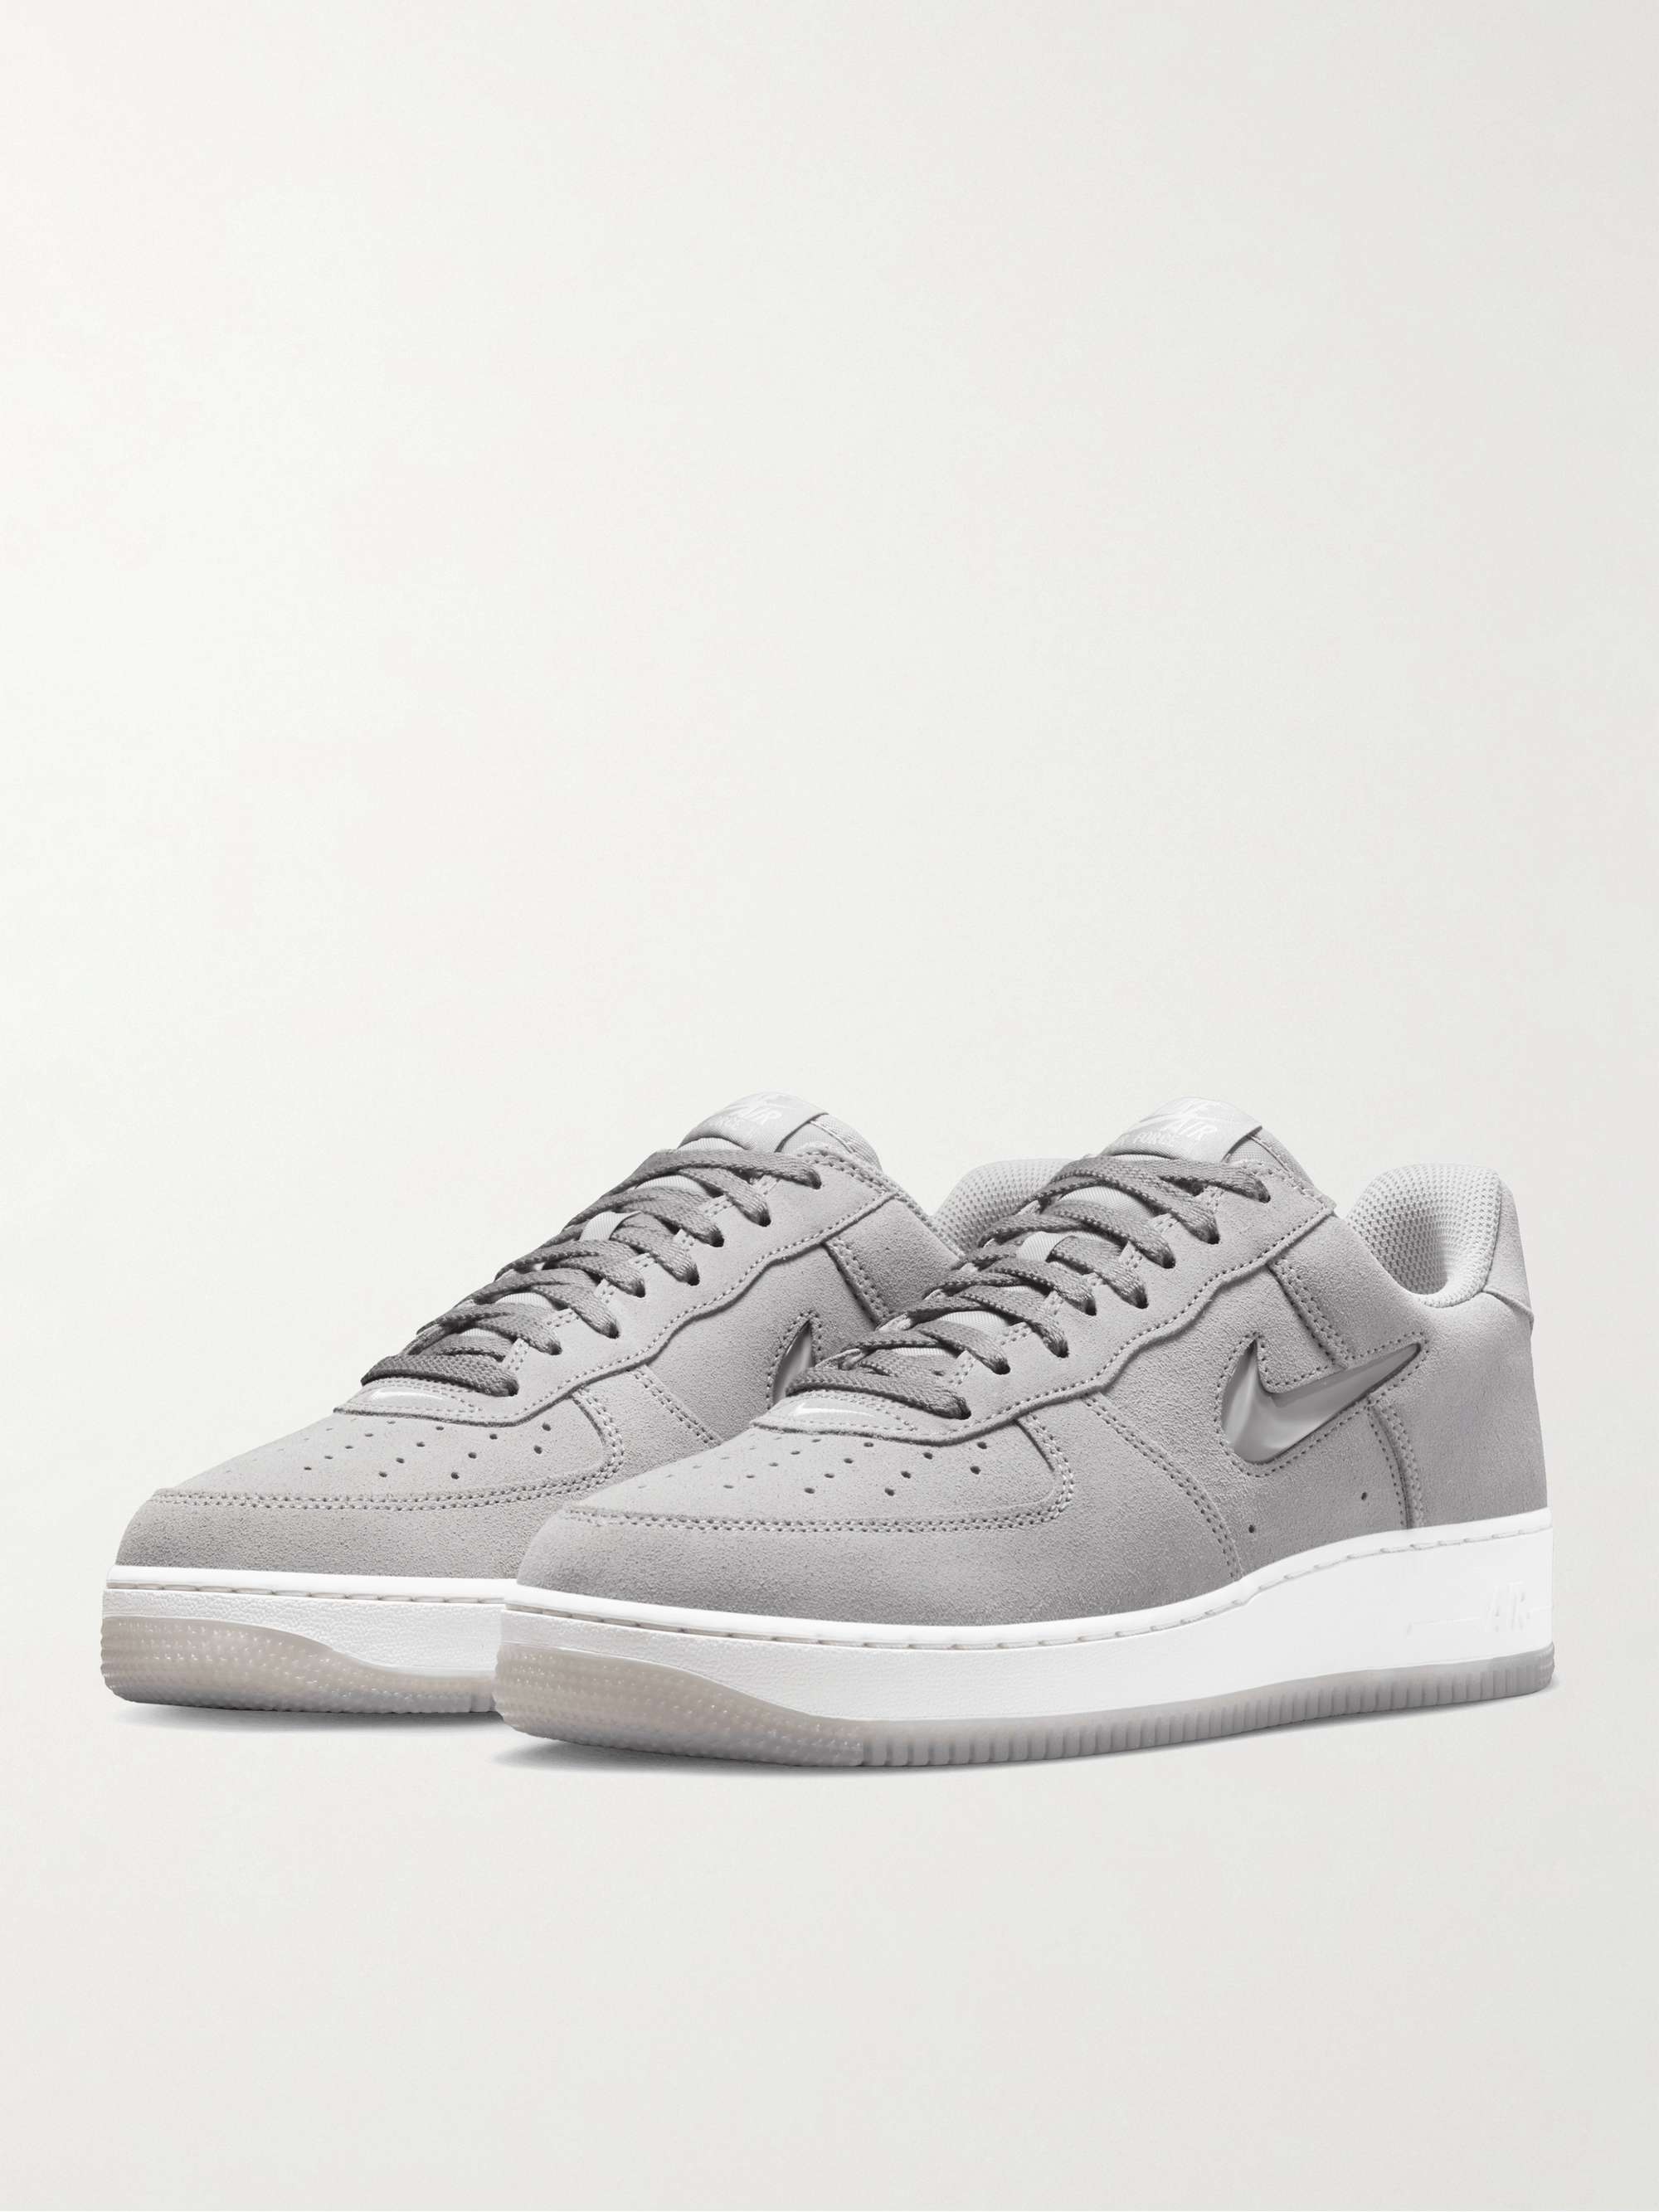 NIKE Air Force 1 Low Retro Suede Sneakers | MR PORTER